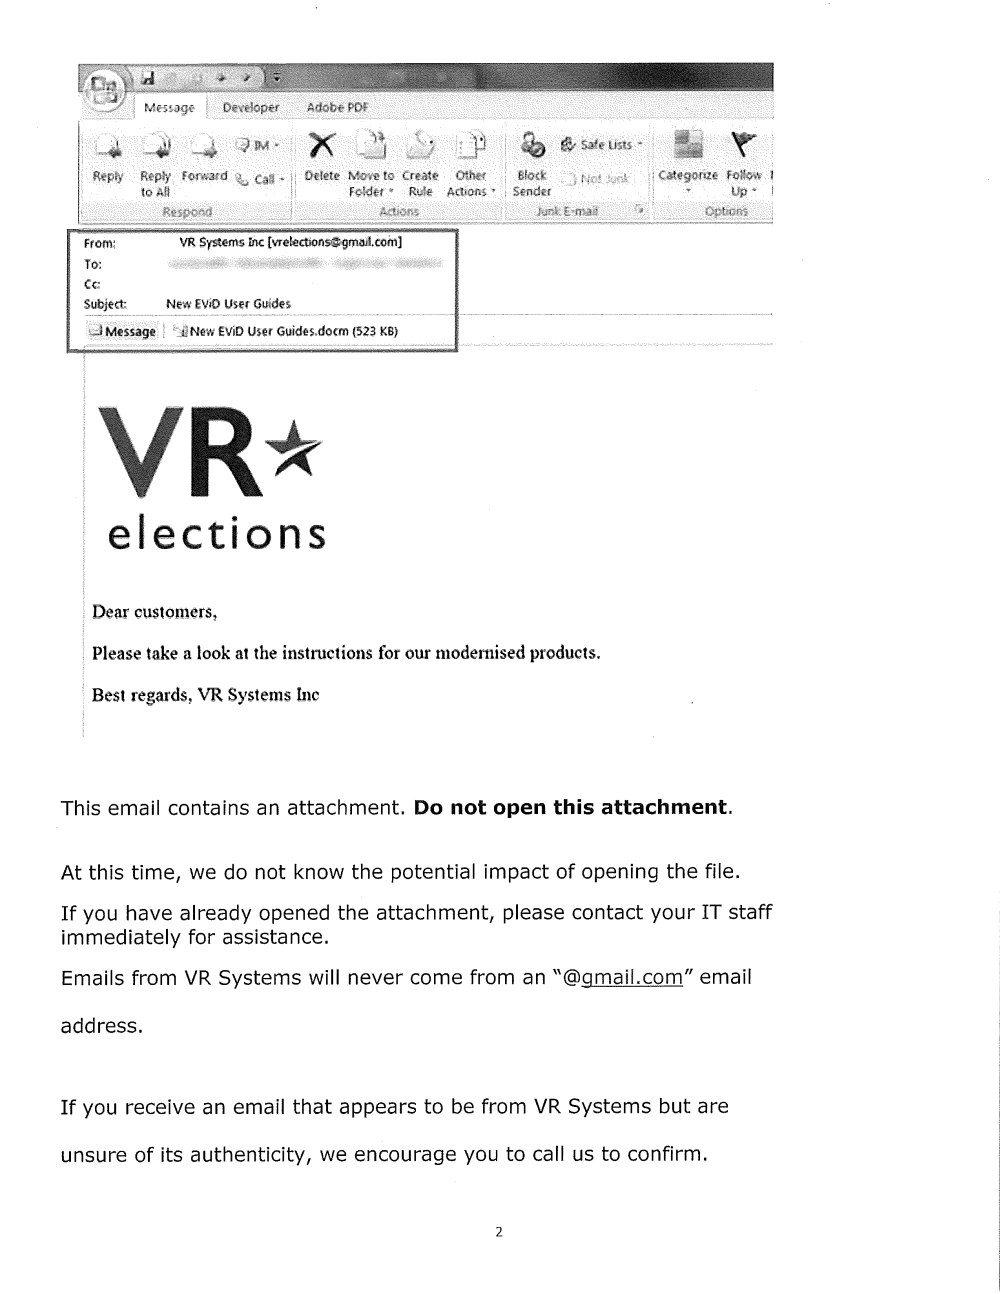 Page 2 from VR Systems Phishing Alert to Mecklenburg County